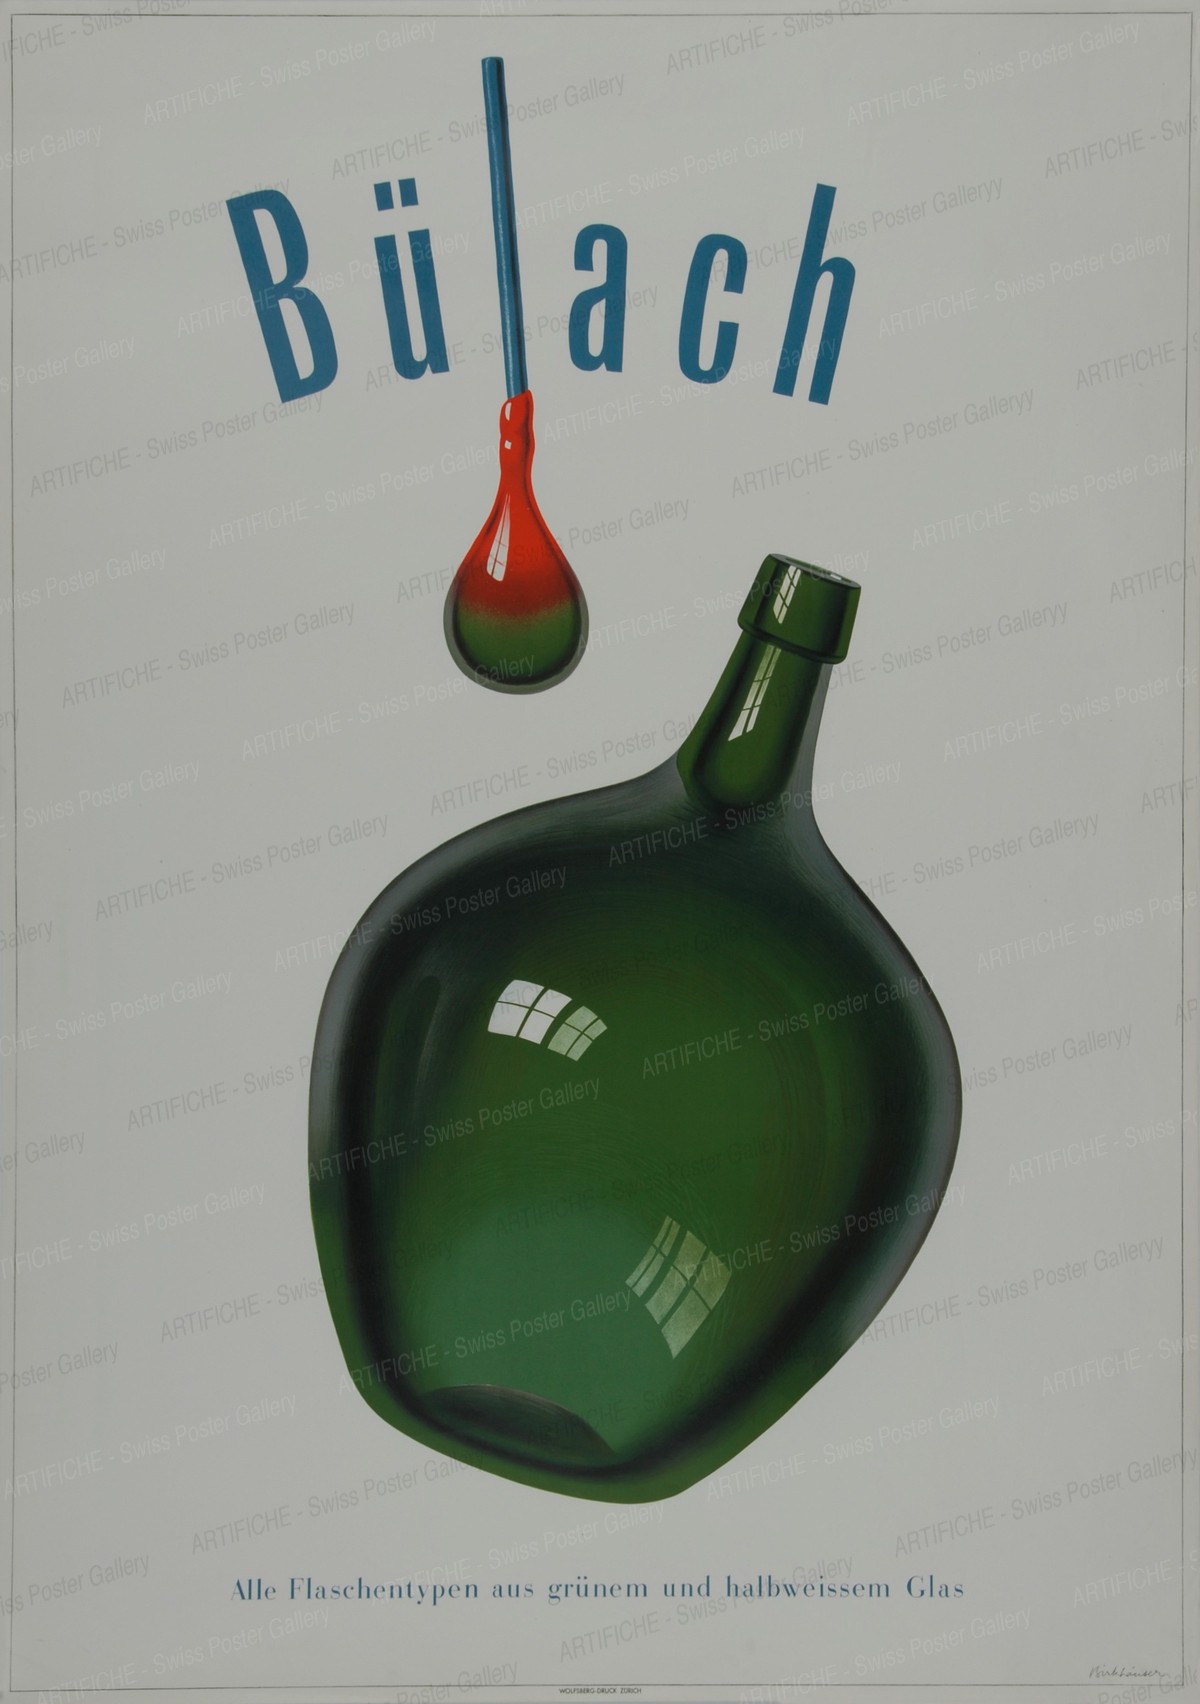 Bülach – All bottle types in green and white glass, Peter Birkhäuser